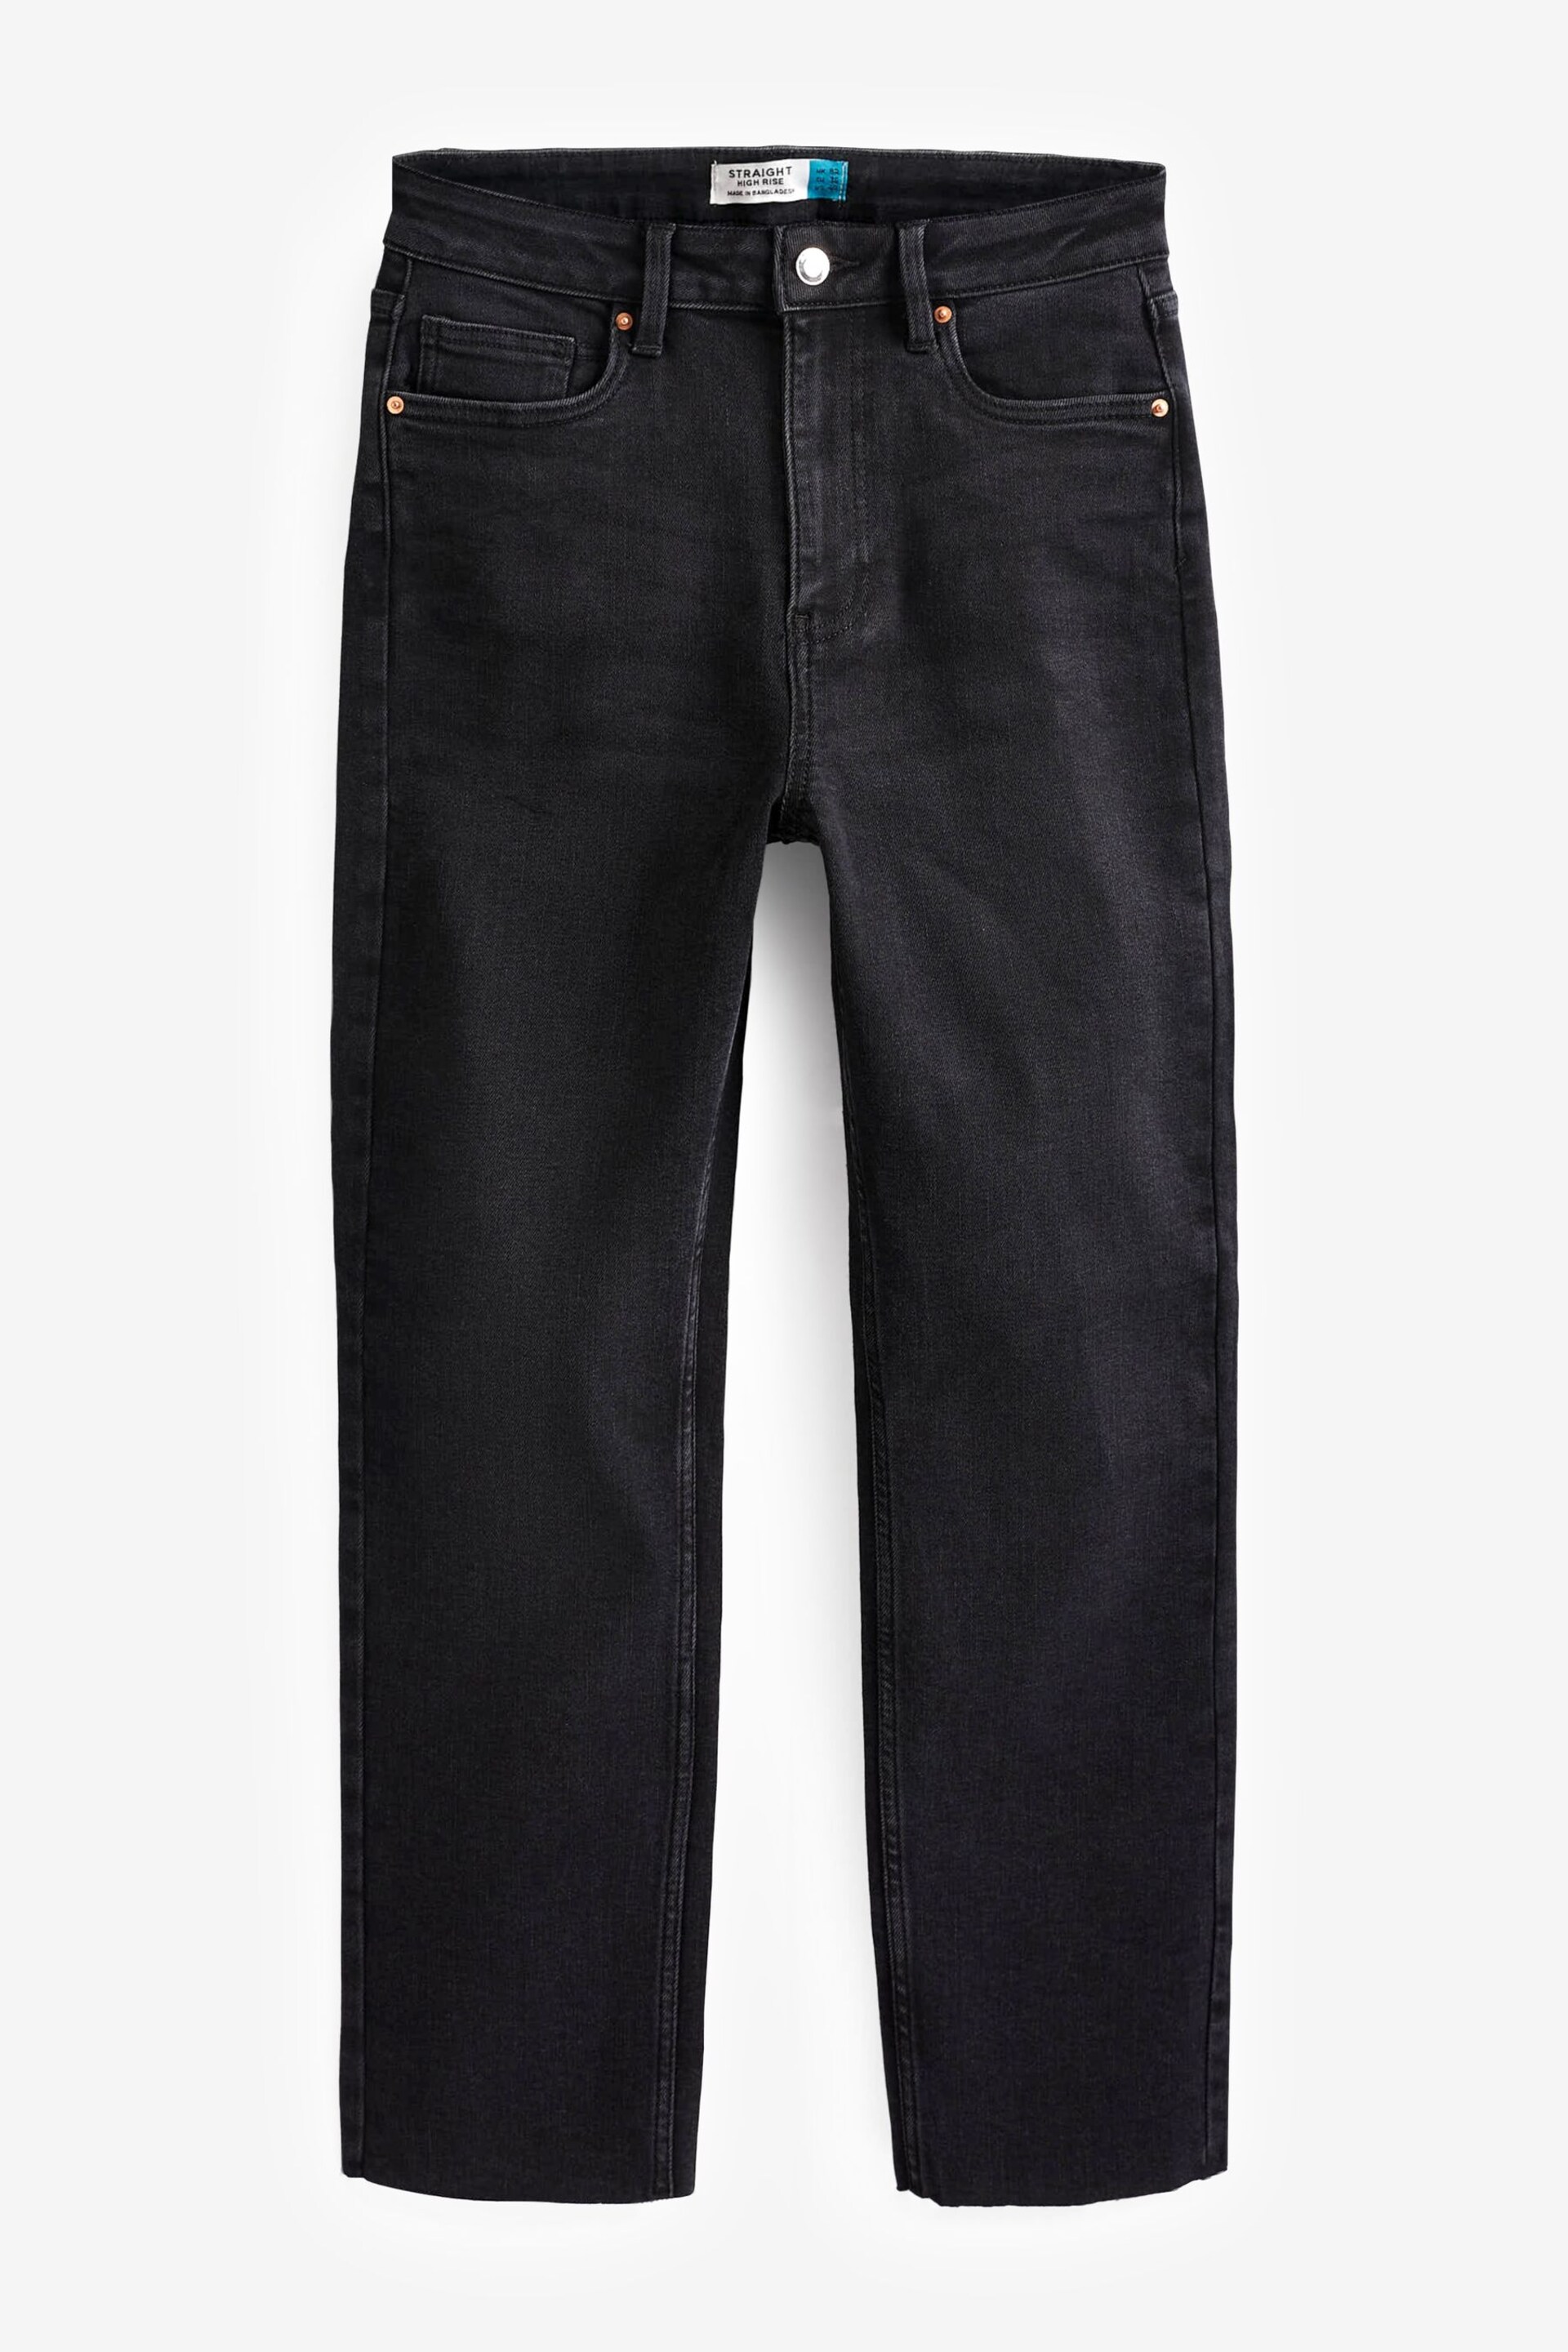 Washed Black Straight Leg Jeans With Raw Hem - Image 5 of 5